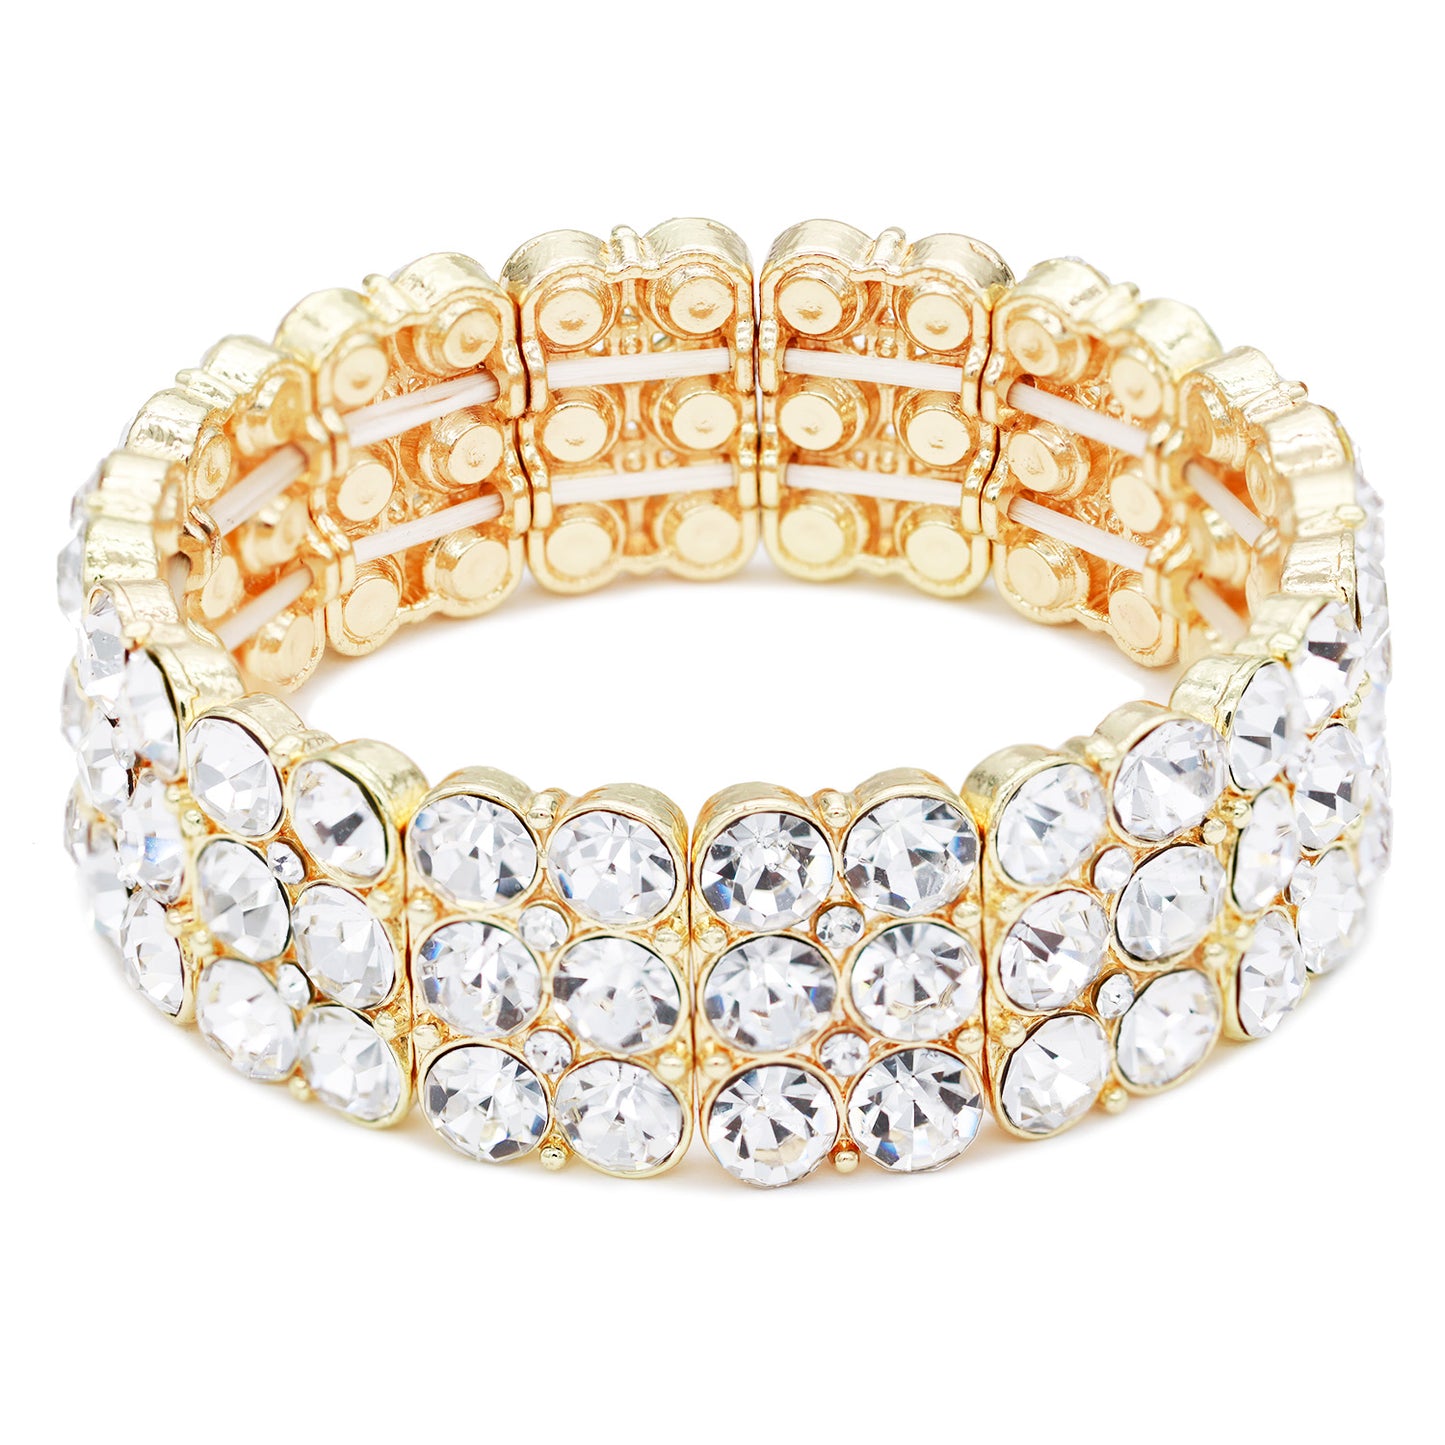 Lavencious Round Shape Rhinestone 3 Lines Stretch Bracelet Evening Party Jewelry 7” (Gold Clear)